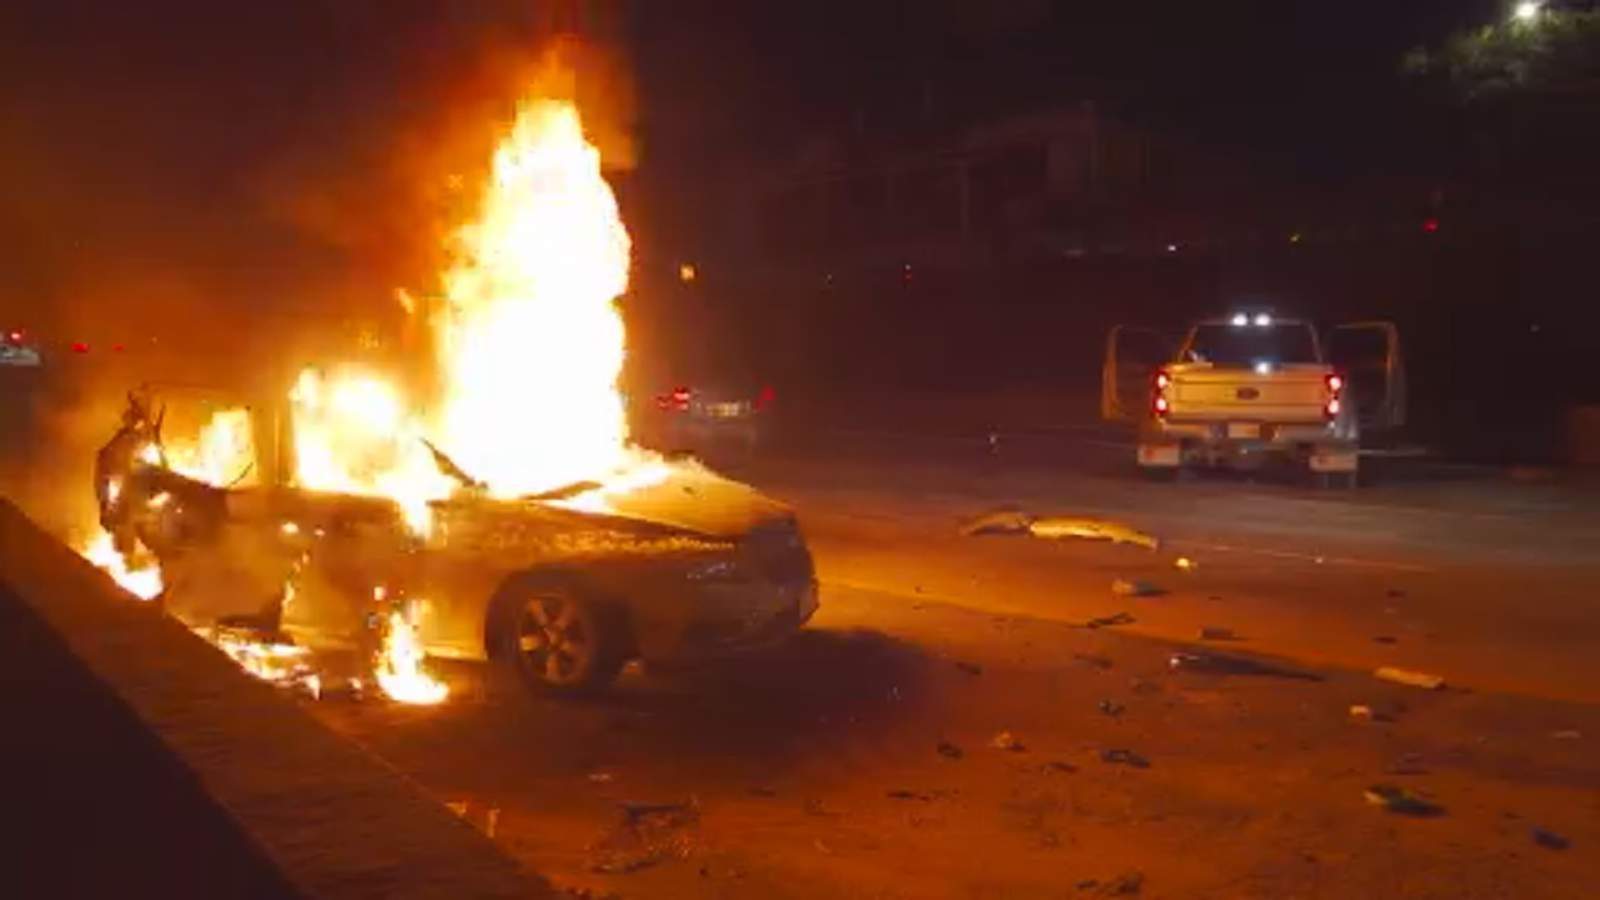 ‘It was just God’s work': 2 women pulled from car moments before it burst into flames